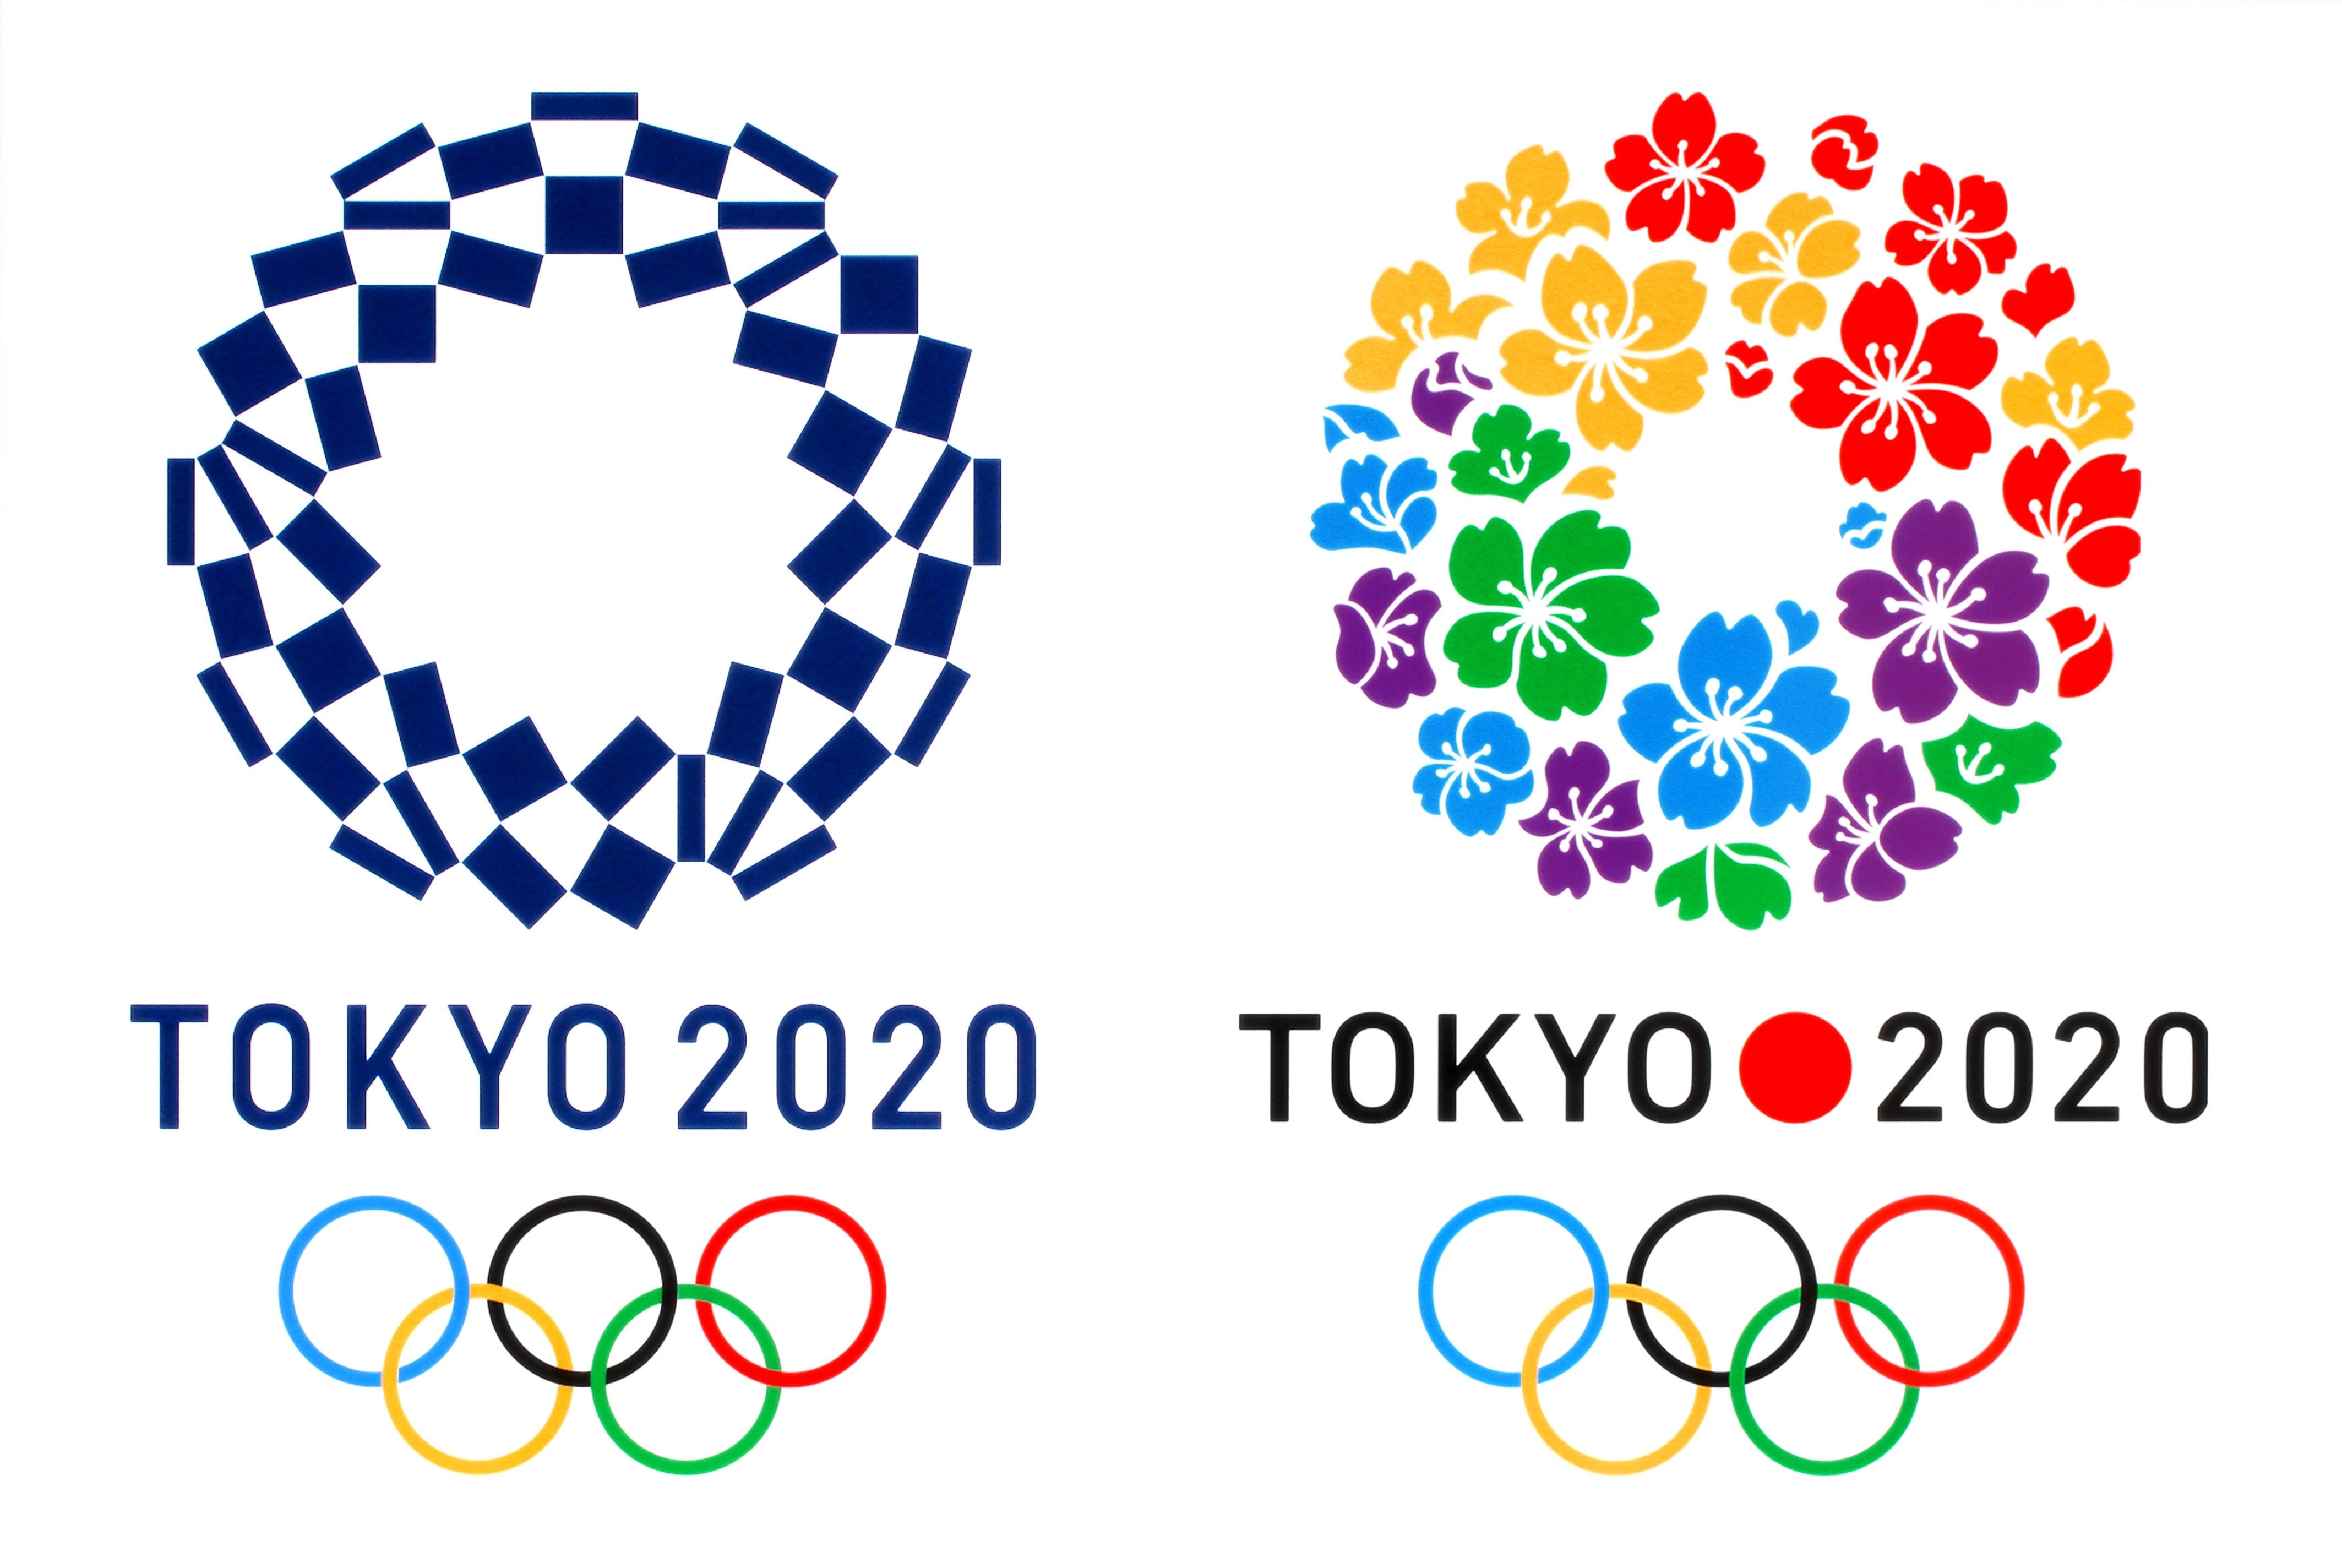 What To Do If You Purchased Tickets For The 2020 Olympic Games